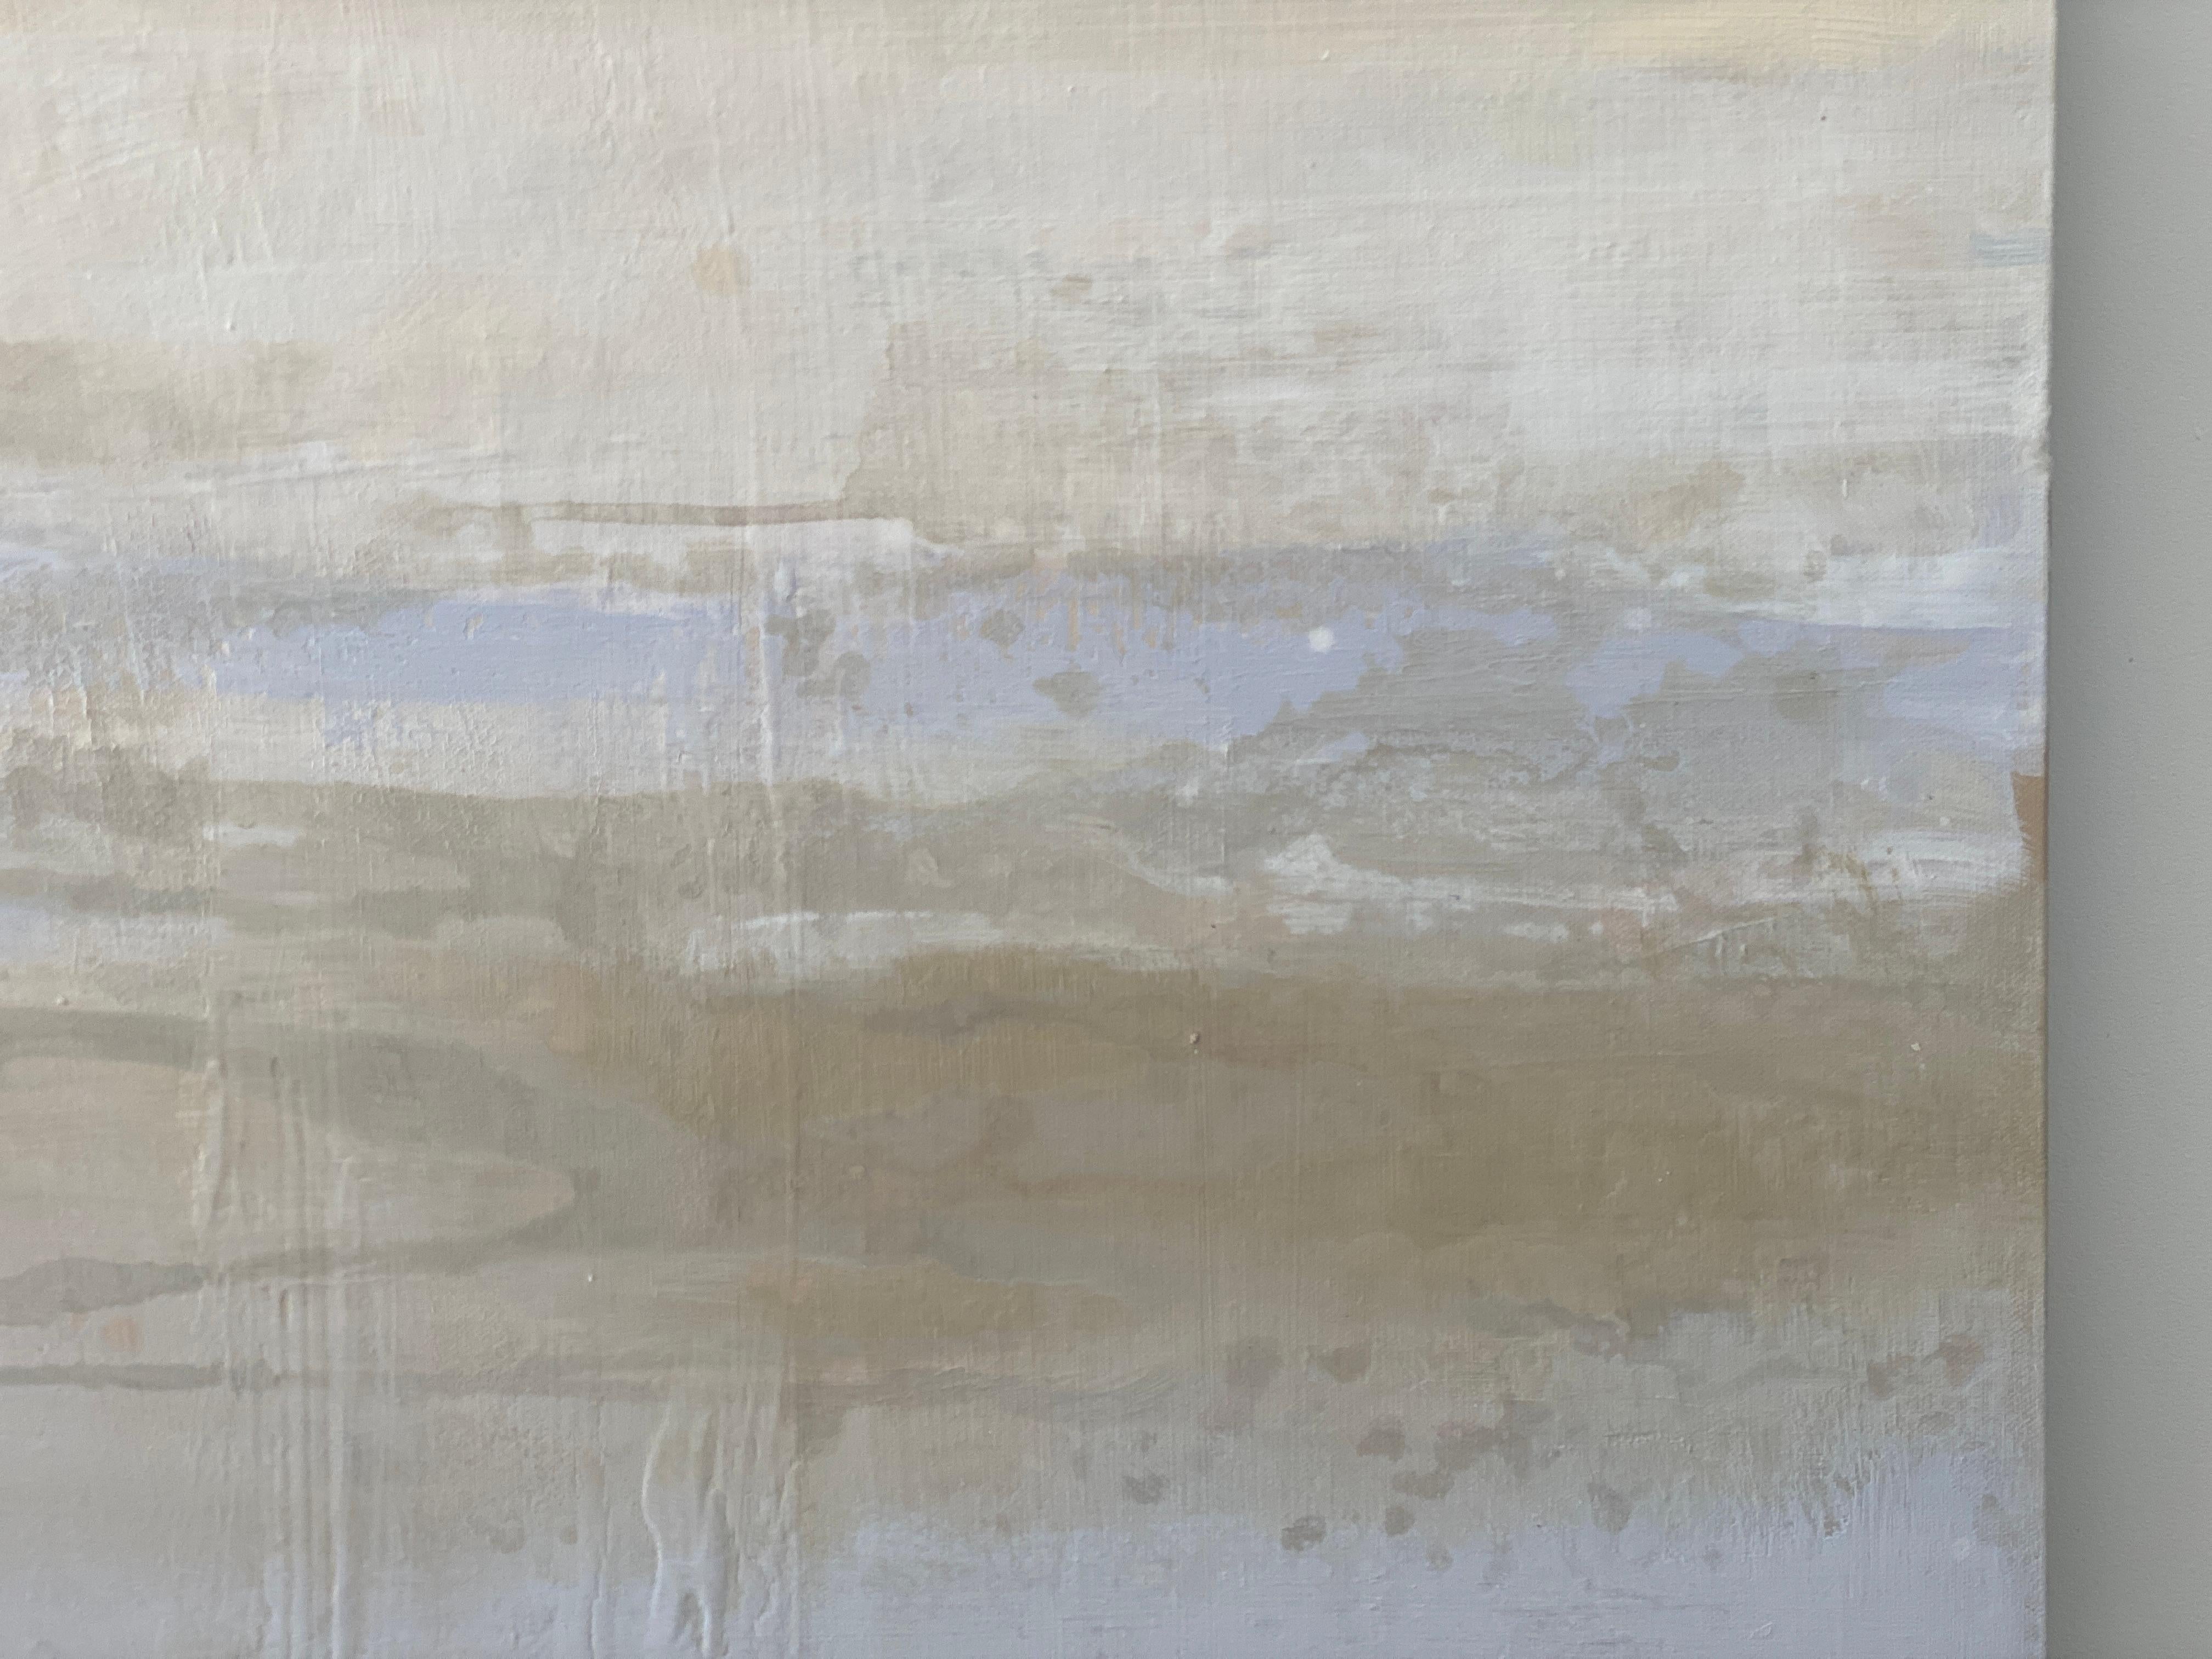 Distant elegant views and reflections over the landscape.  An abstract impressionist painting, capturing an ethereal of the Australian landscape, bursts of soft white clouds and earthy tones merge in a dance of colour and texture, embodying the raw,